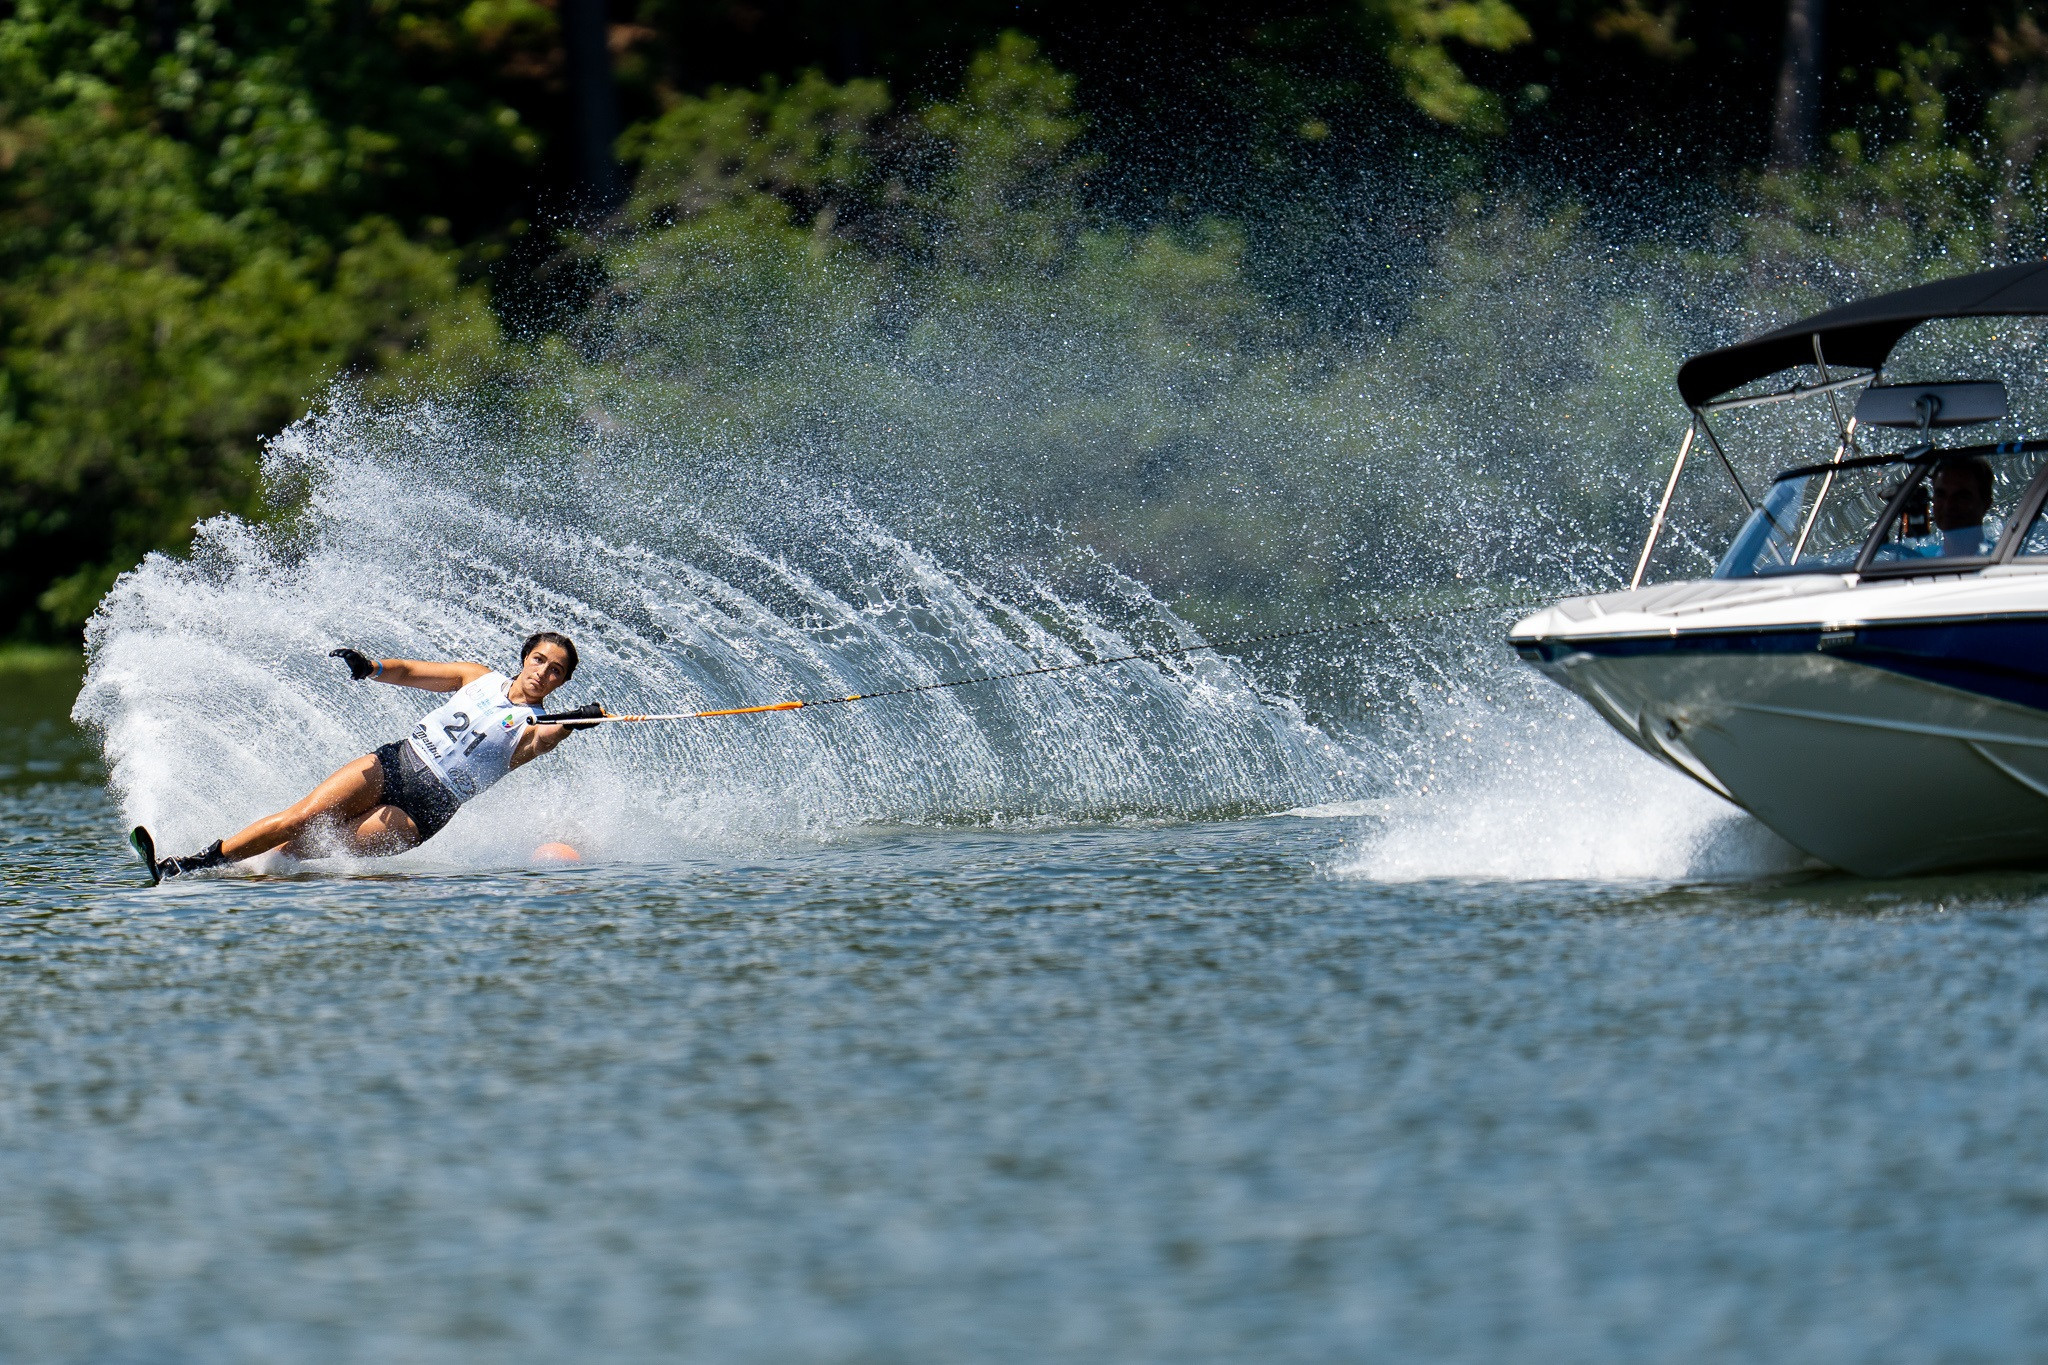 The women's waterski slalom final was hotly contested on the water at Oak Mountain State Park ©The World Games 2022